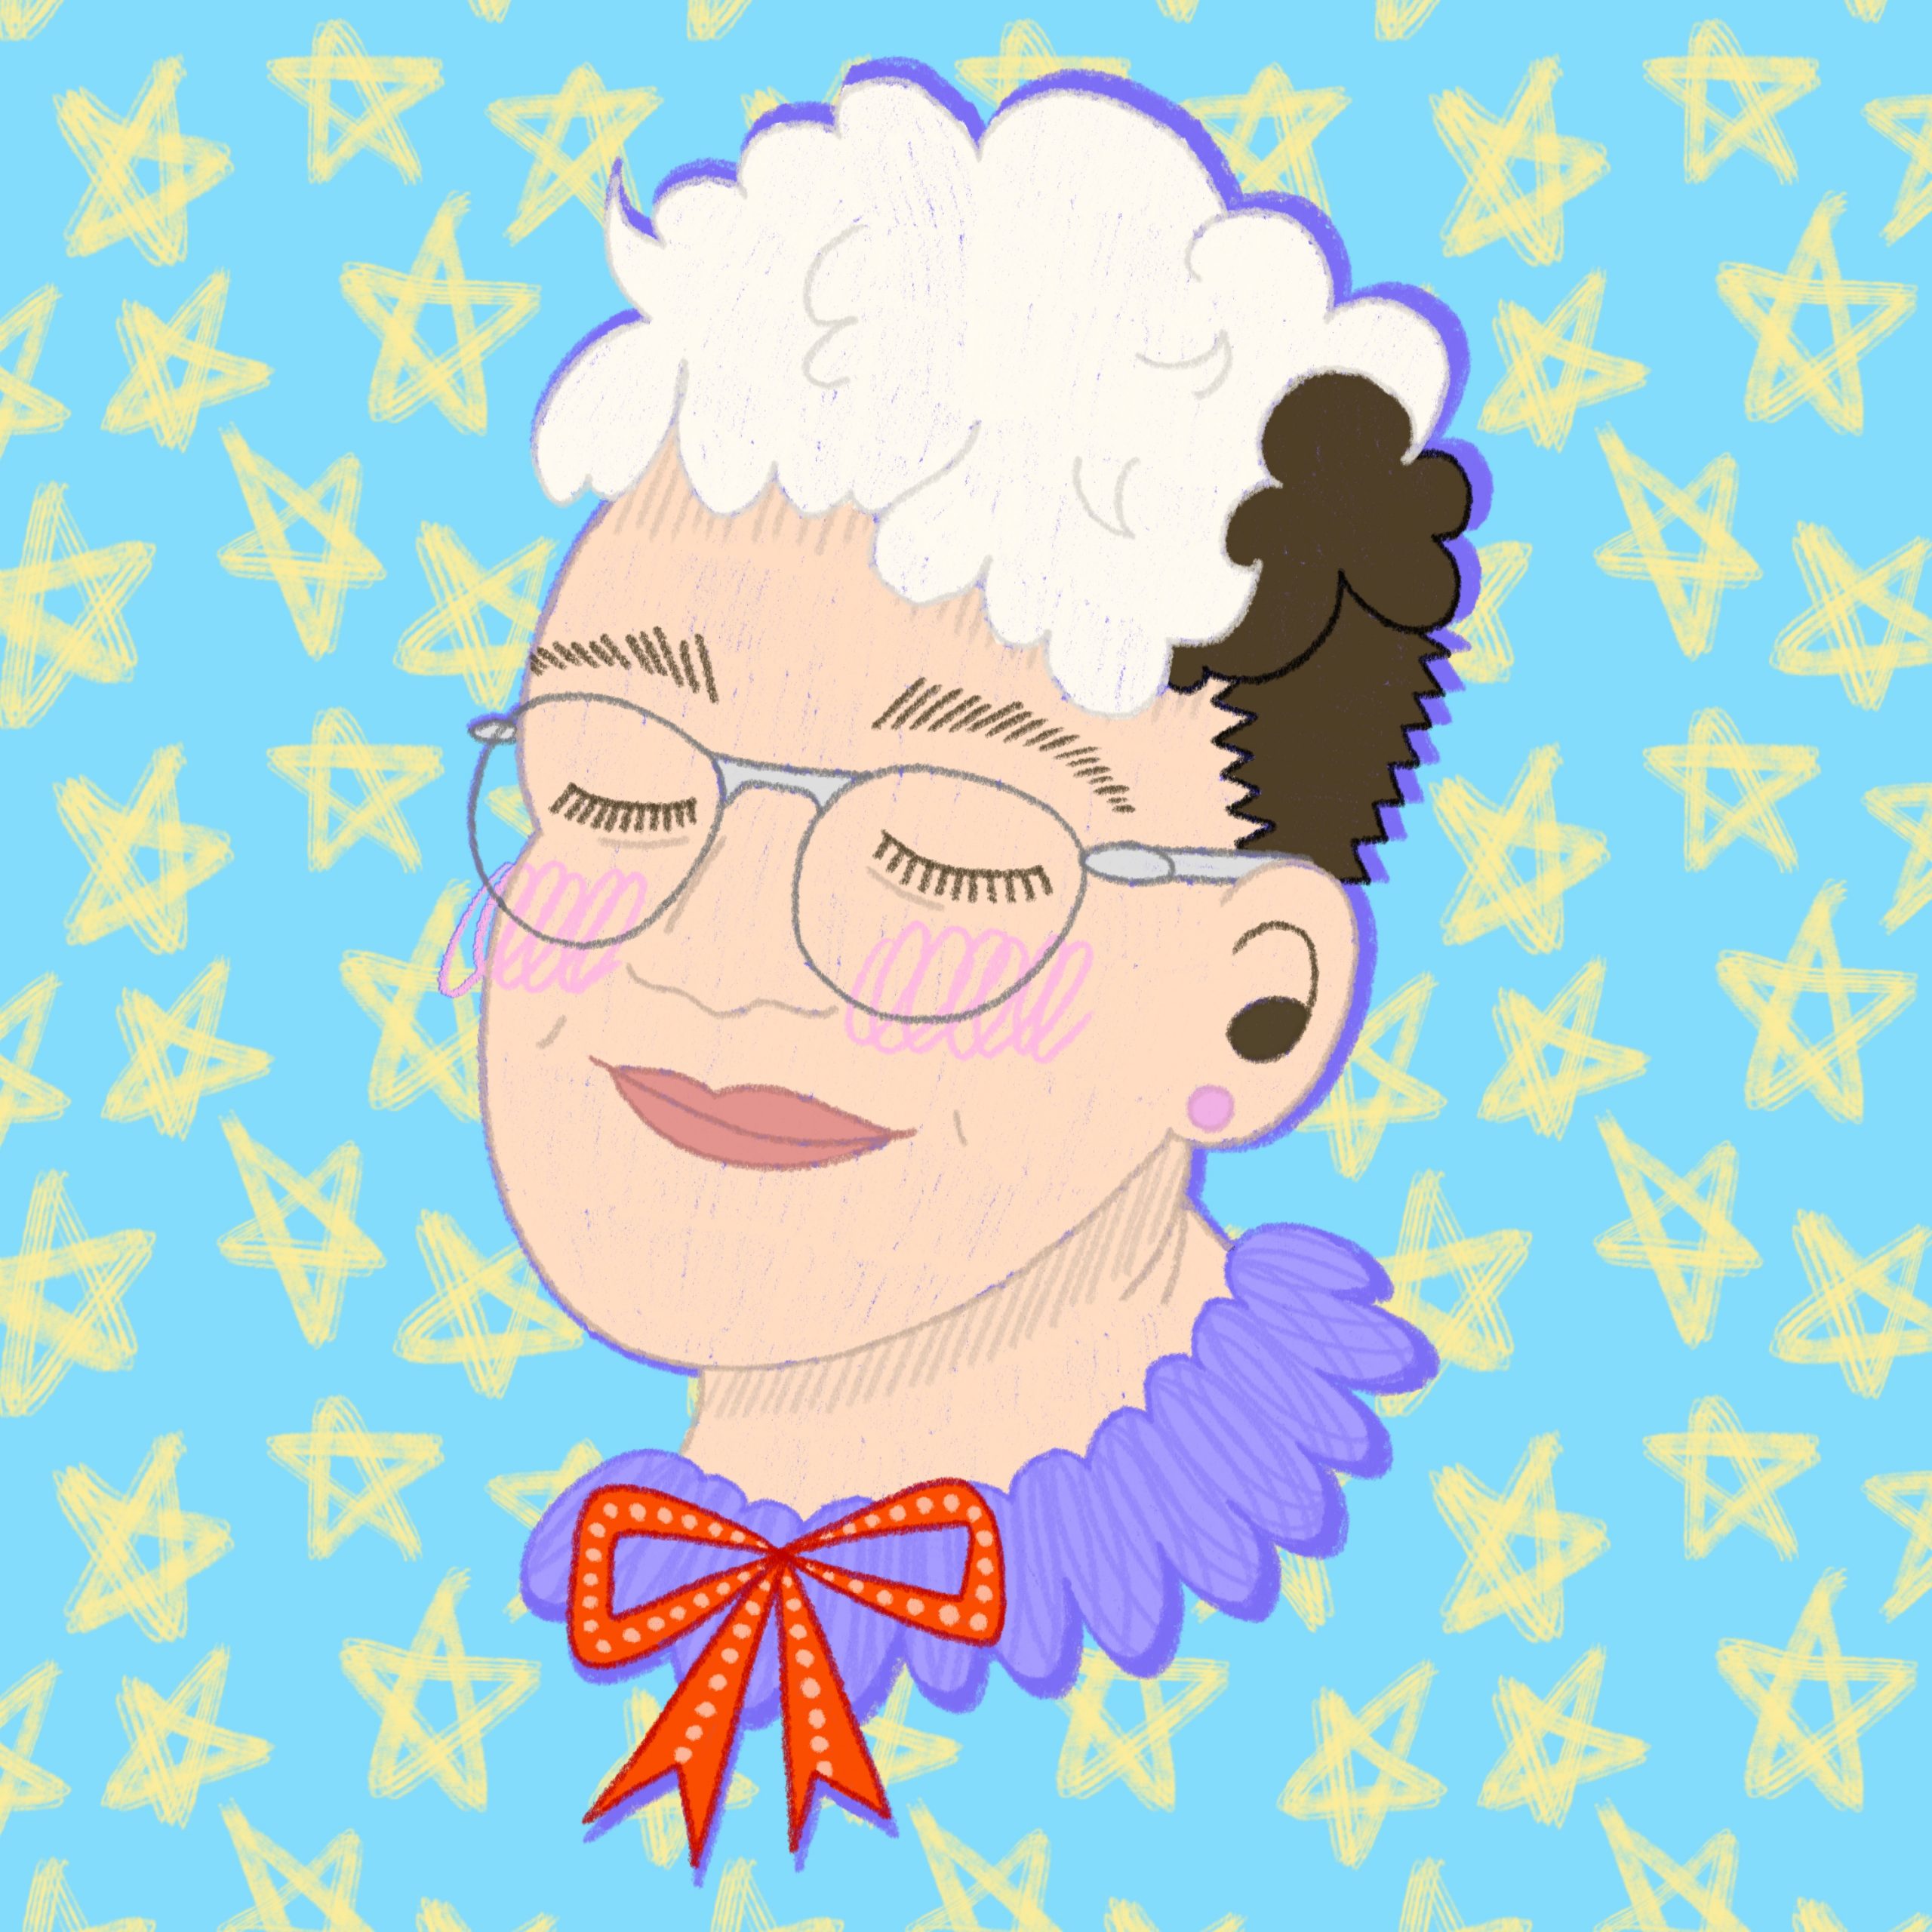 illustration of Juniper Harwood, a white neuroqueer person with a brown and blonde mullet and a frilly collar